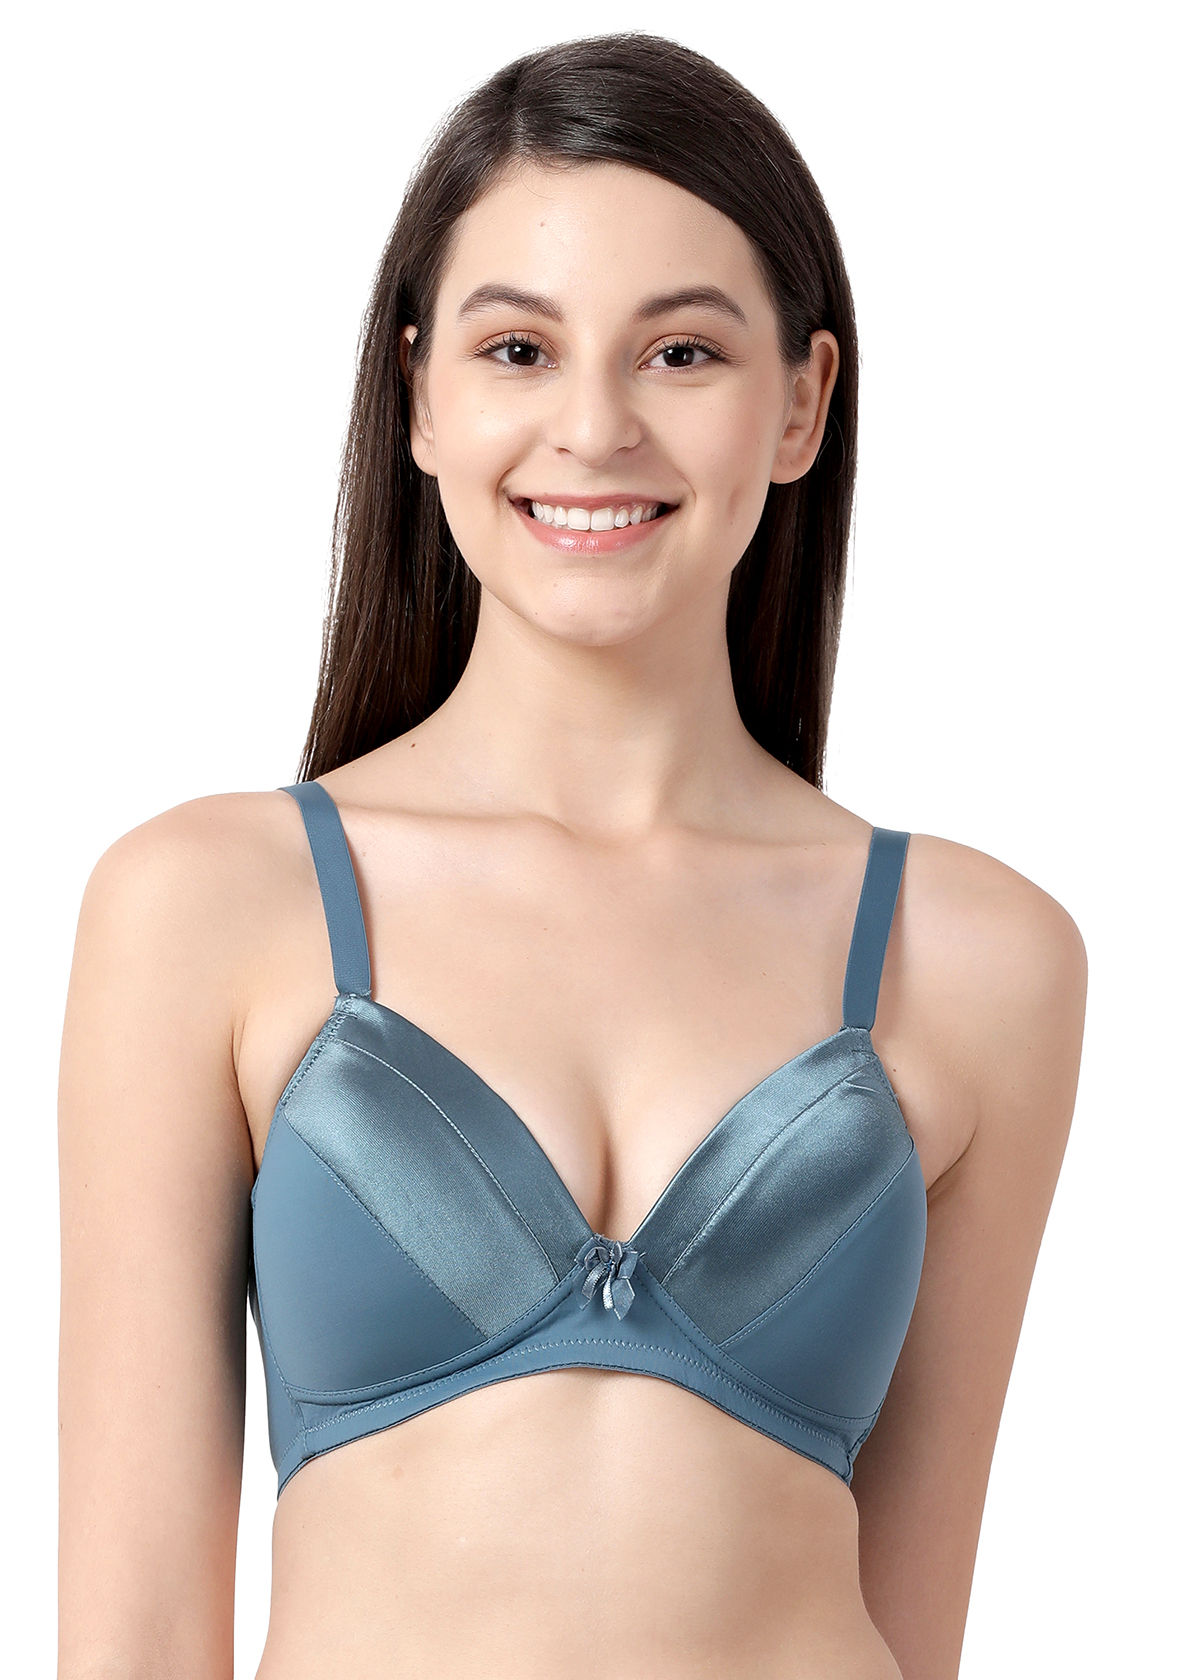 Buy Taabu by Shyaway Everyday Bras - Padded Wirefree Full Coverage